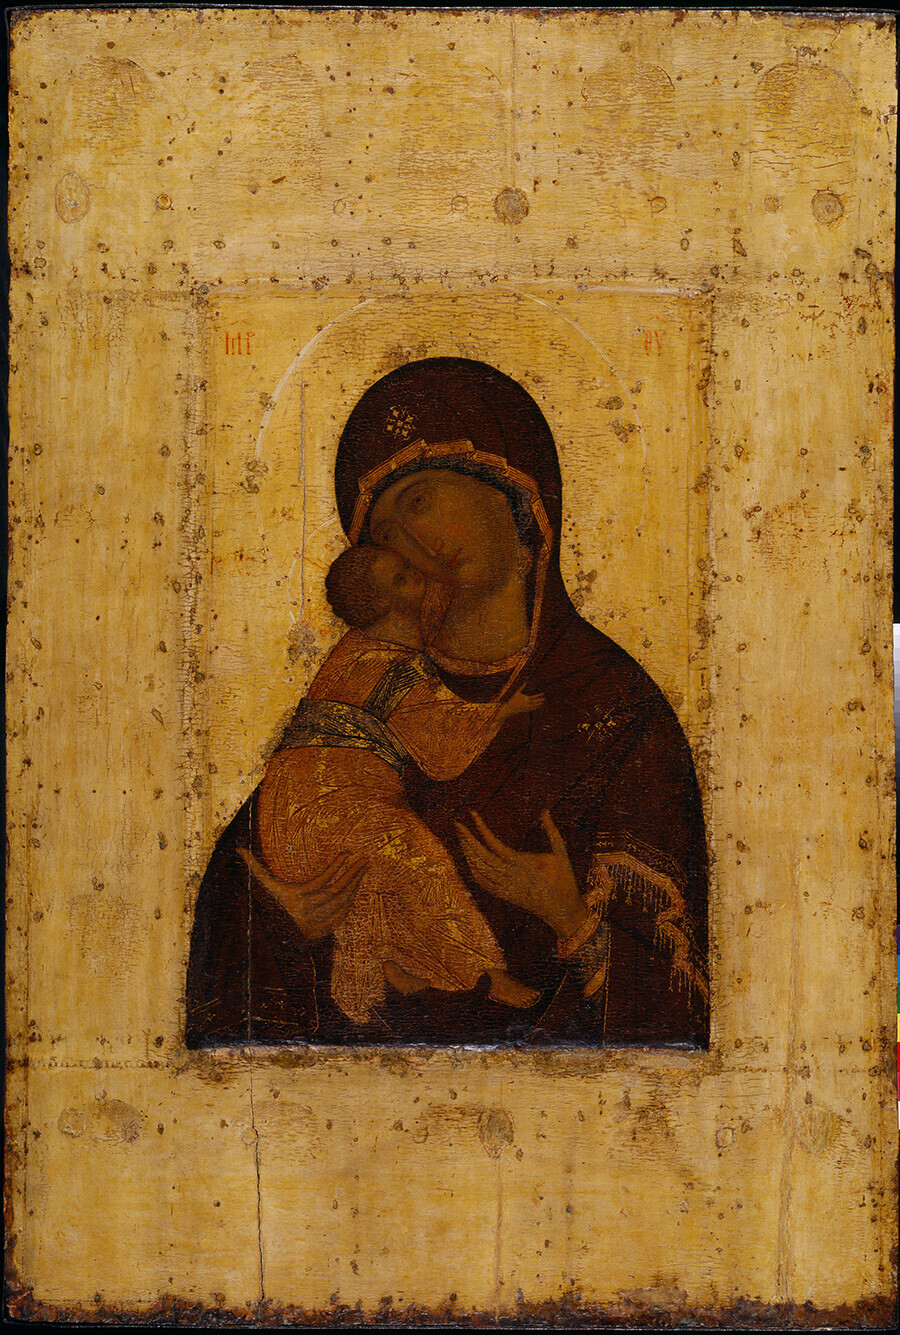 Our Lady of Vladimir. Early 15th century. Attributed to Andrei Rublev